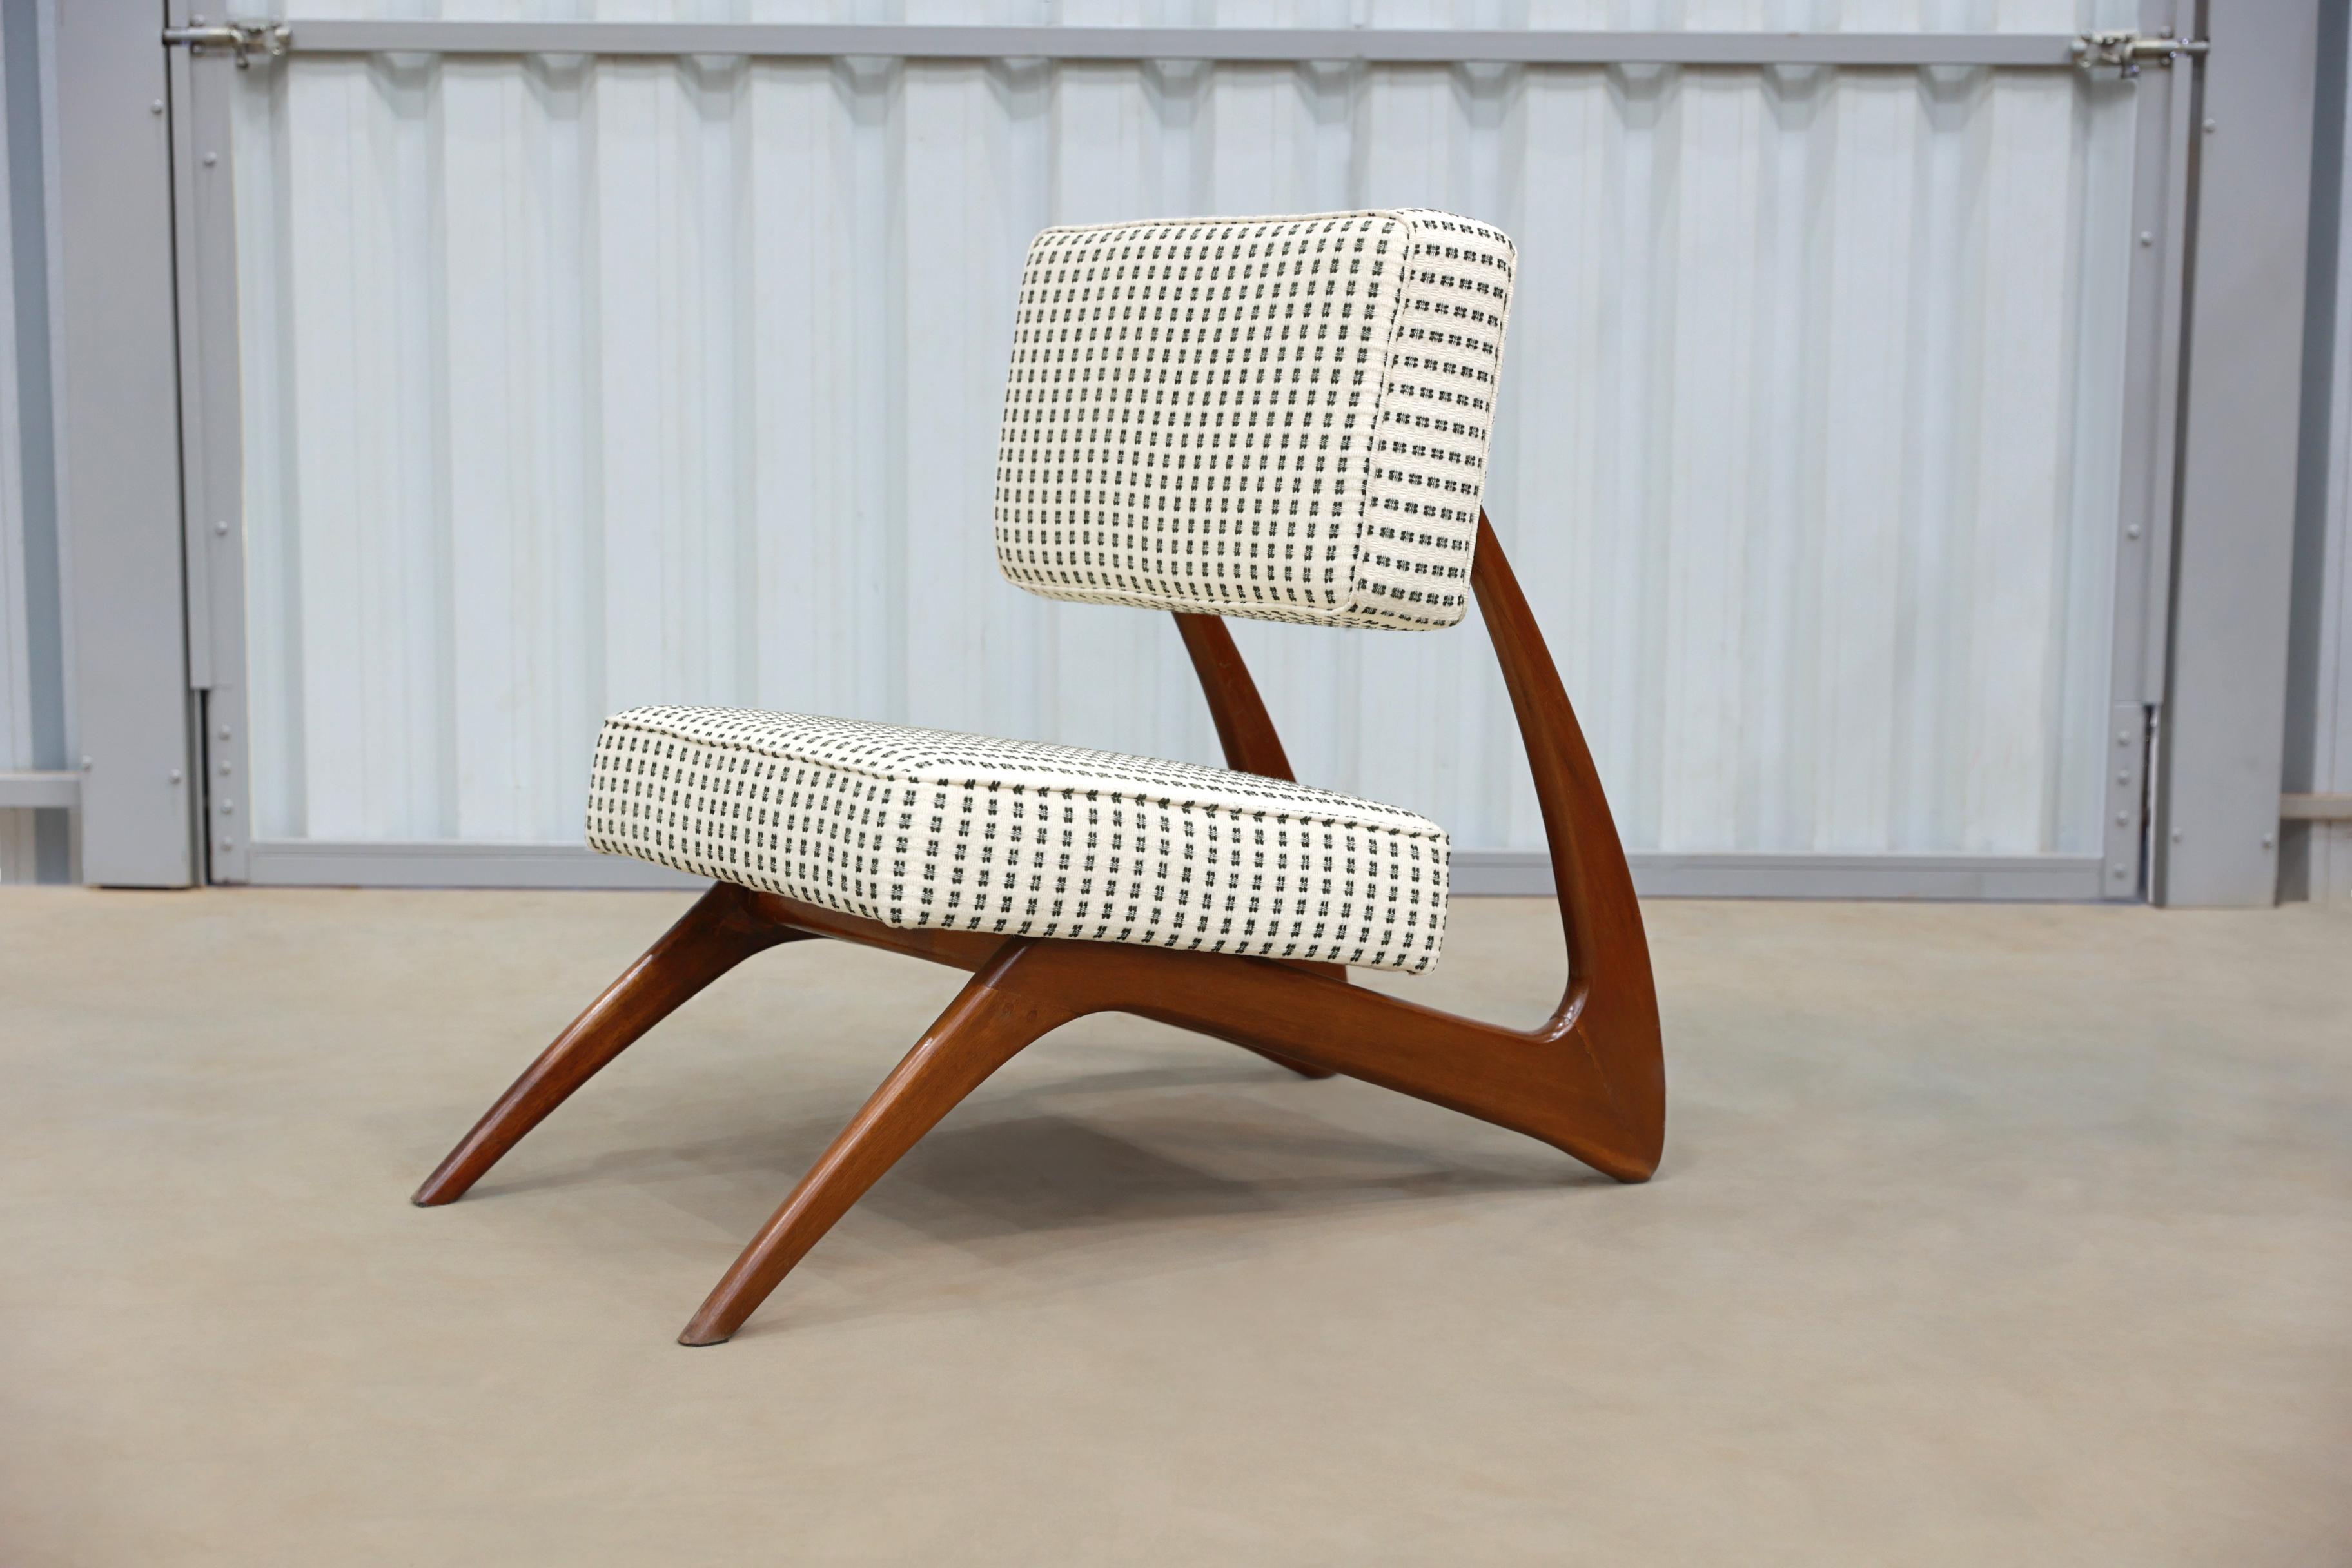 20th Century Brazilian Modern Lounge Chair in hardwood by Moveis Cimo, Brazil, 1950s